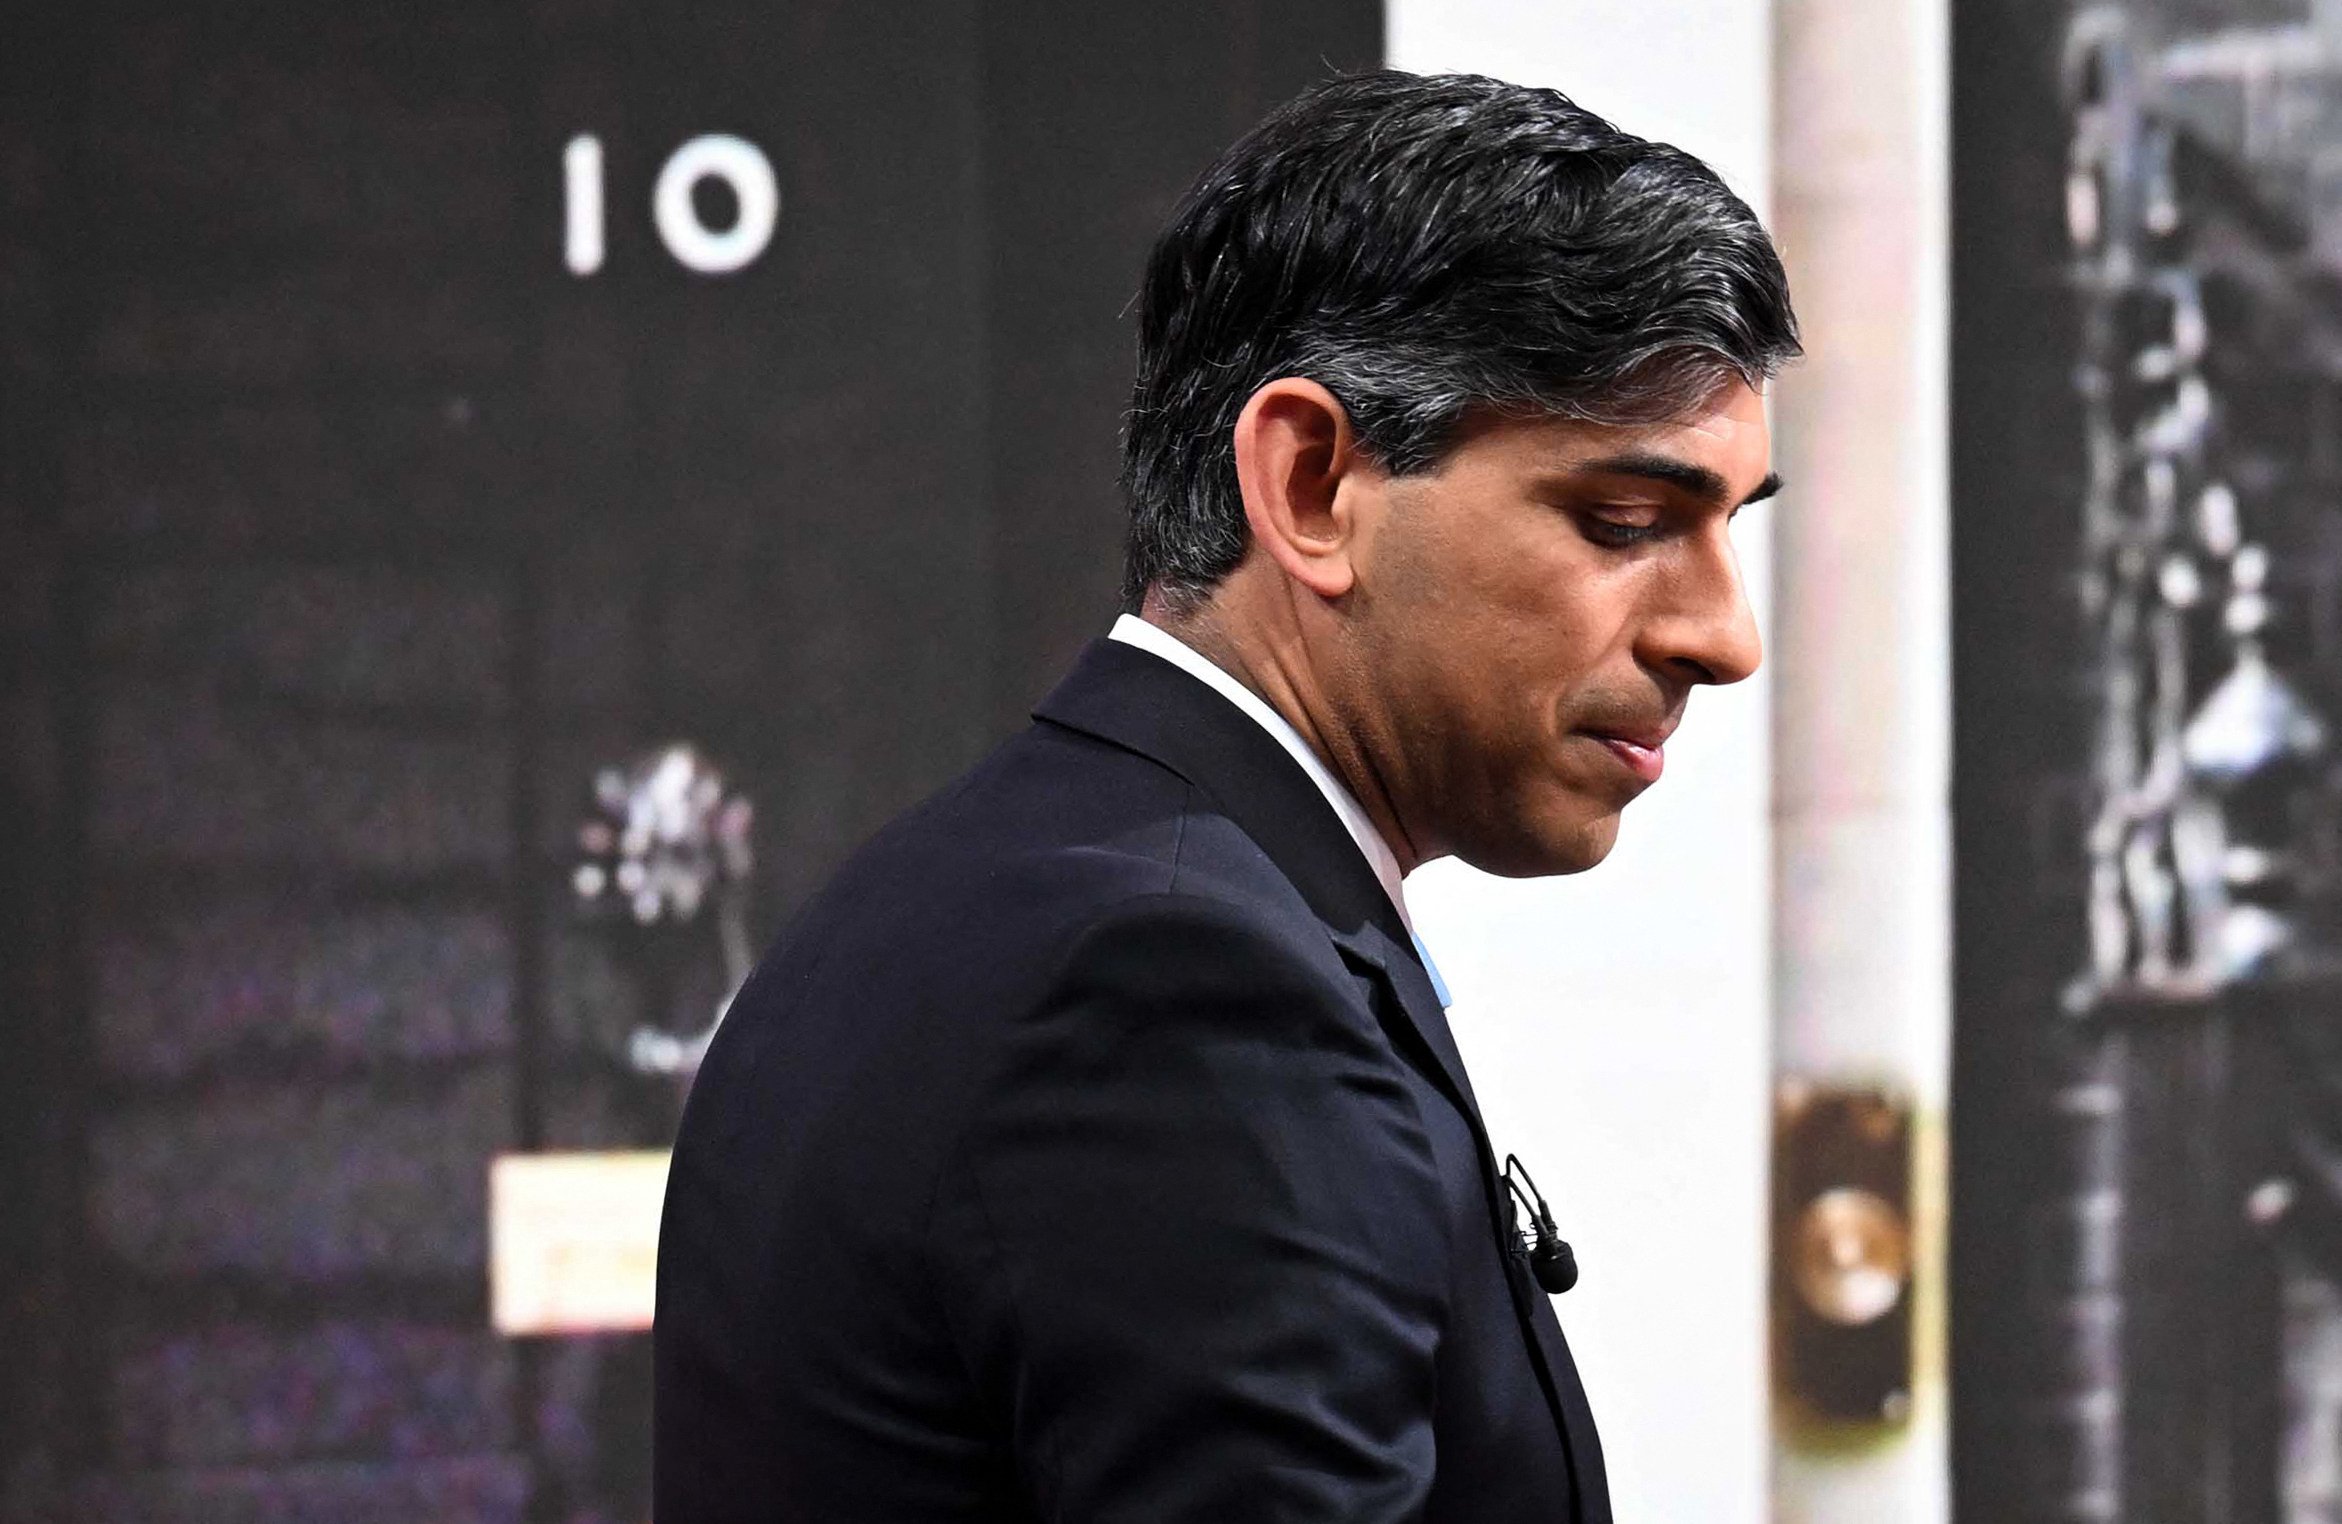 Britain’s Prime Minister Rishi Sunak appearing on the BBC’s ‘Sunday Morning’ show. Photo: BBC via AFP 